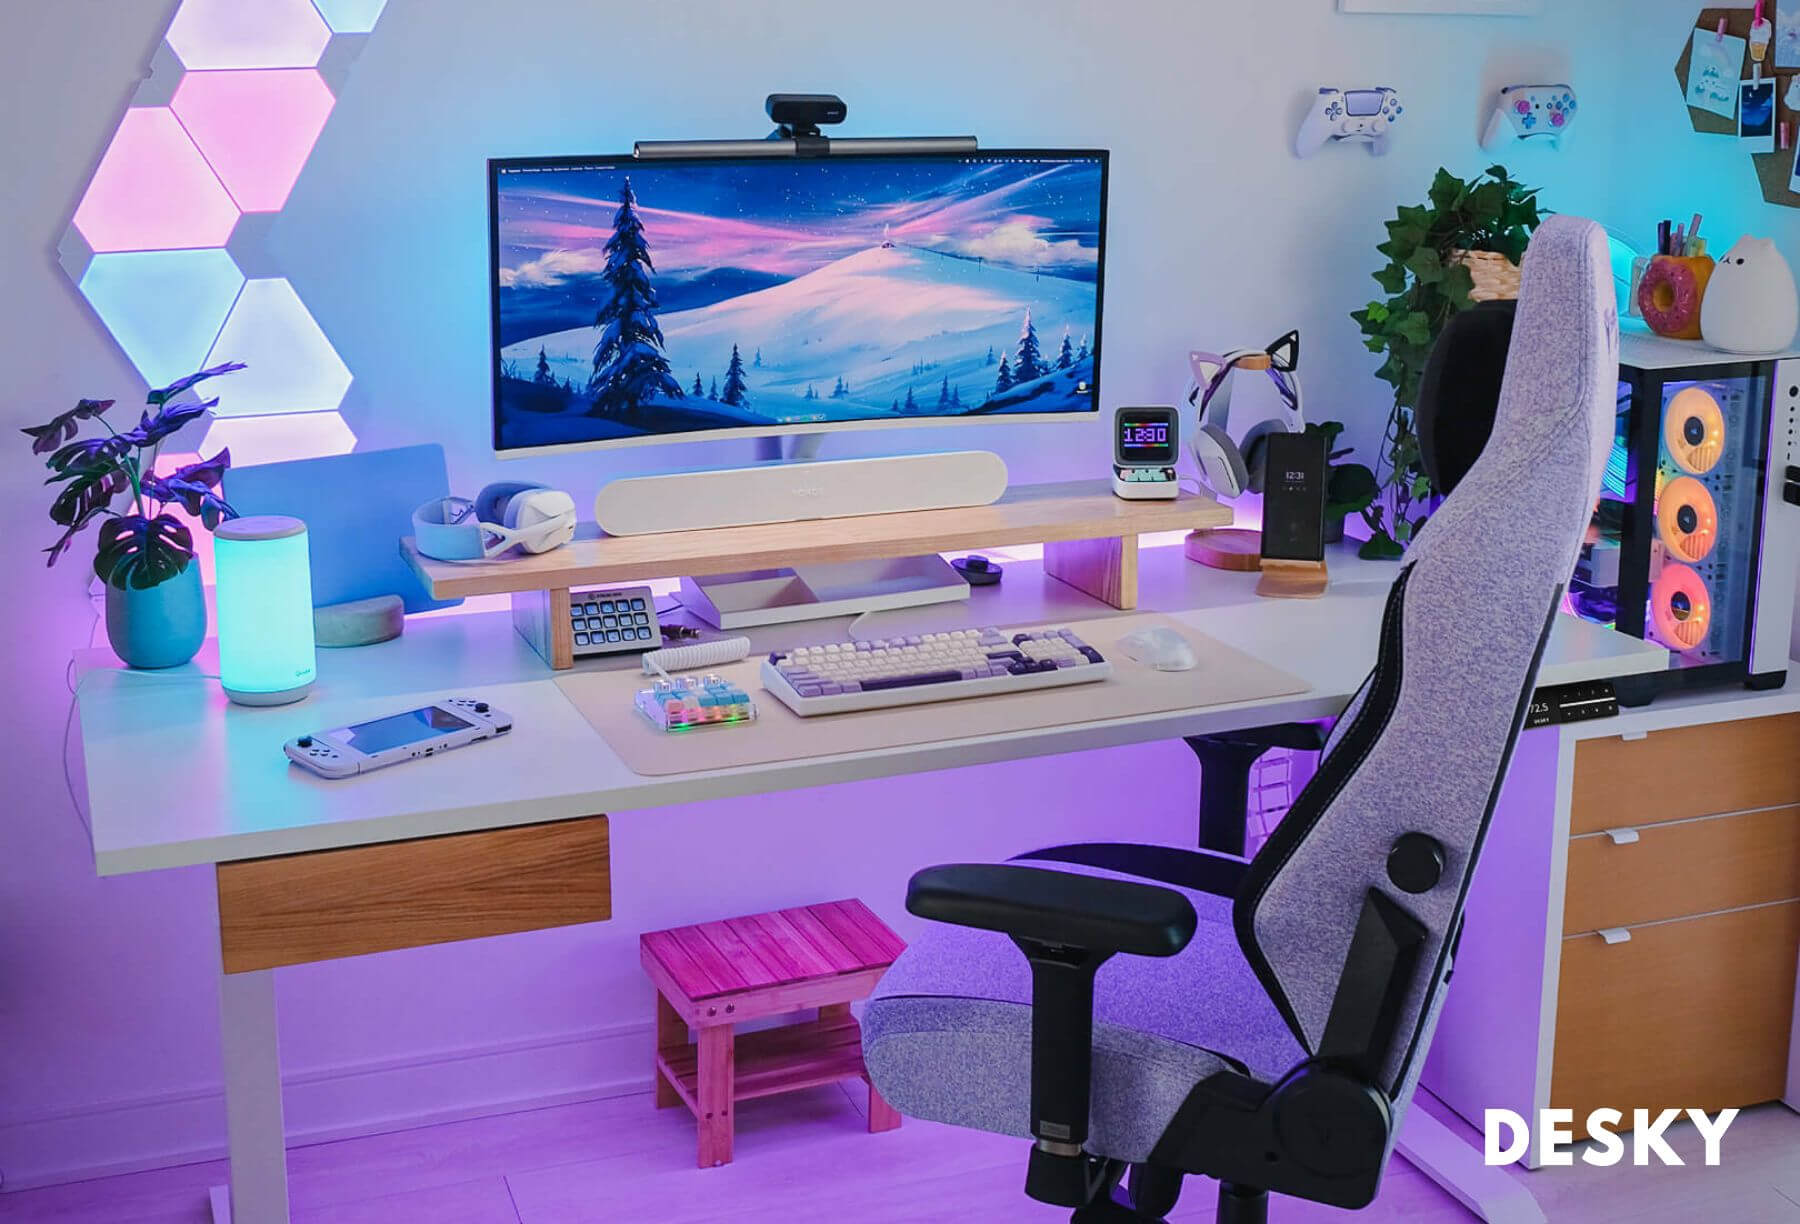 What's The Best Gaming Desk Setup? - Desky Canada